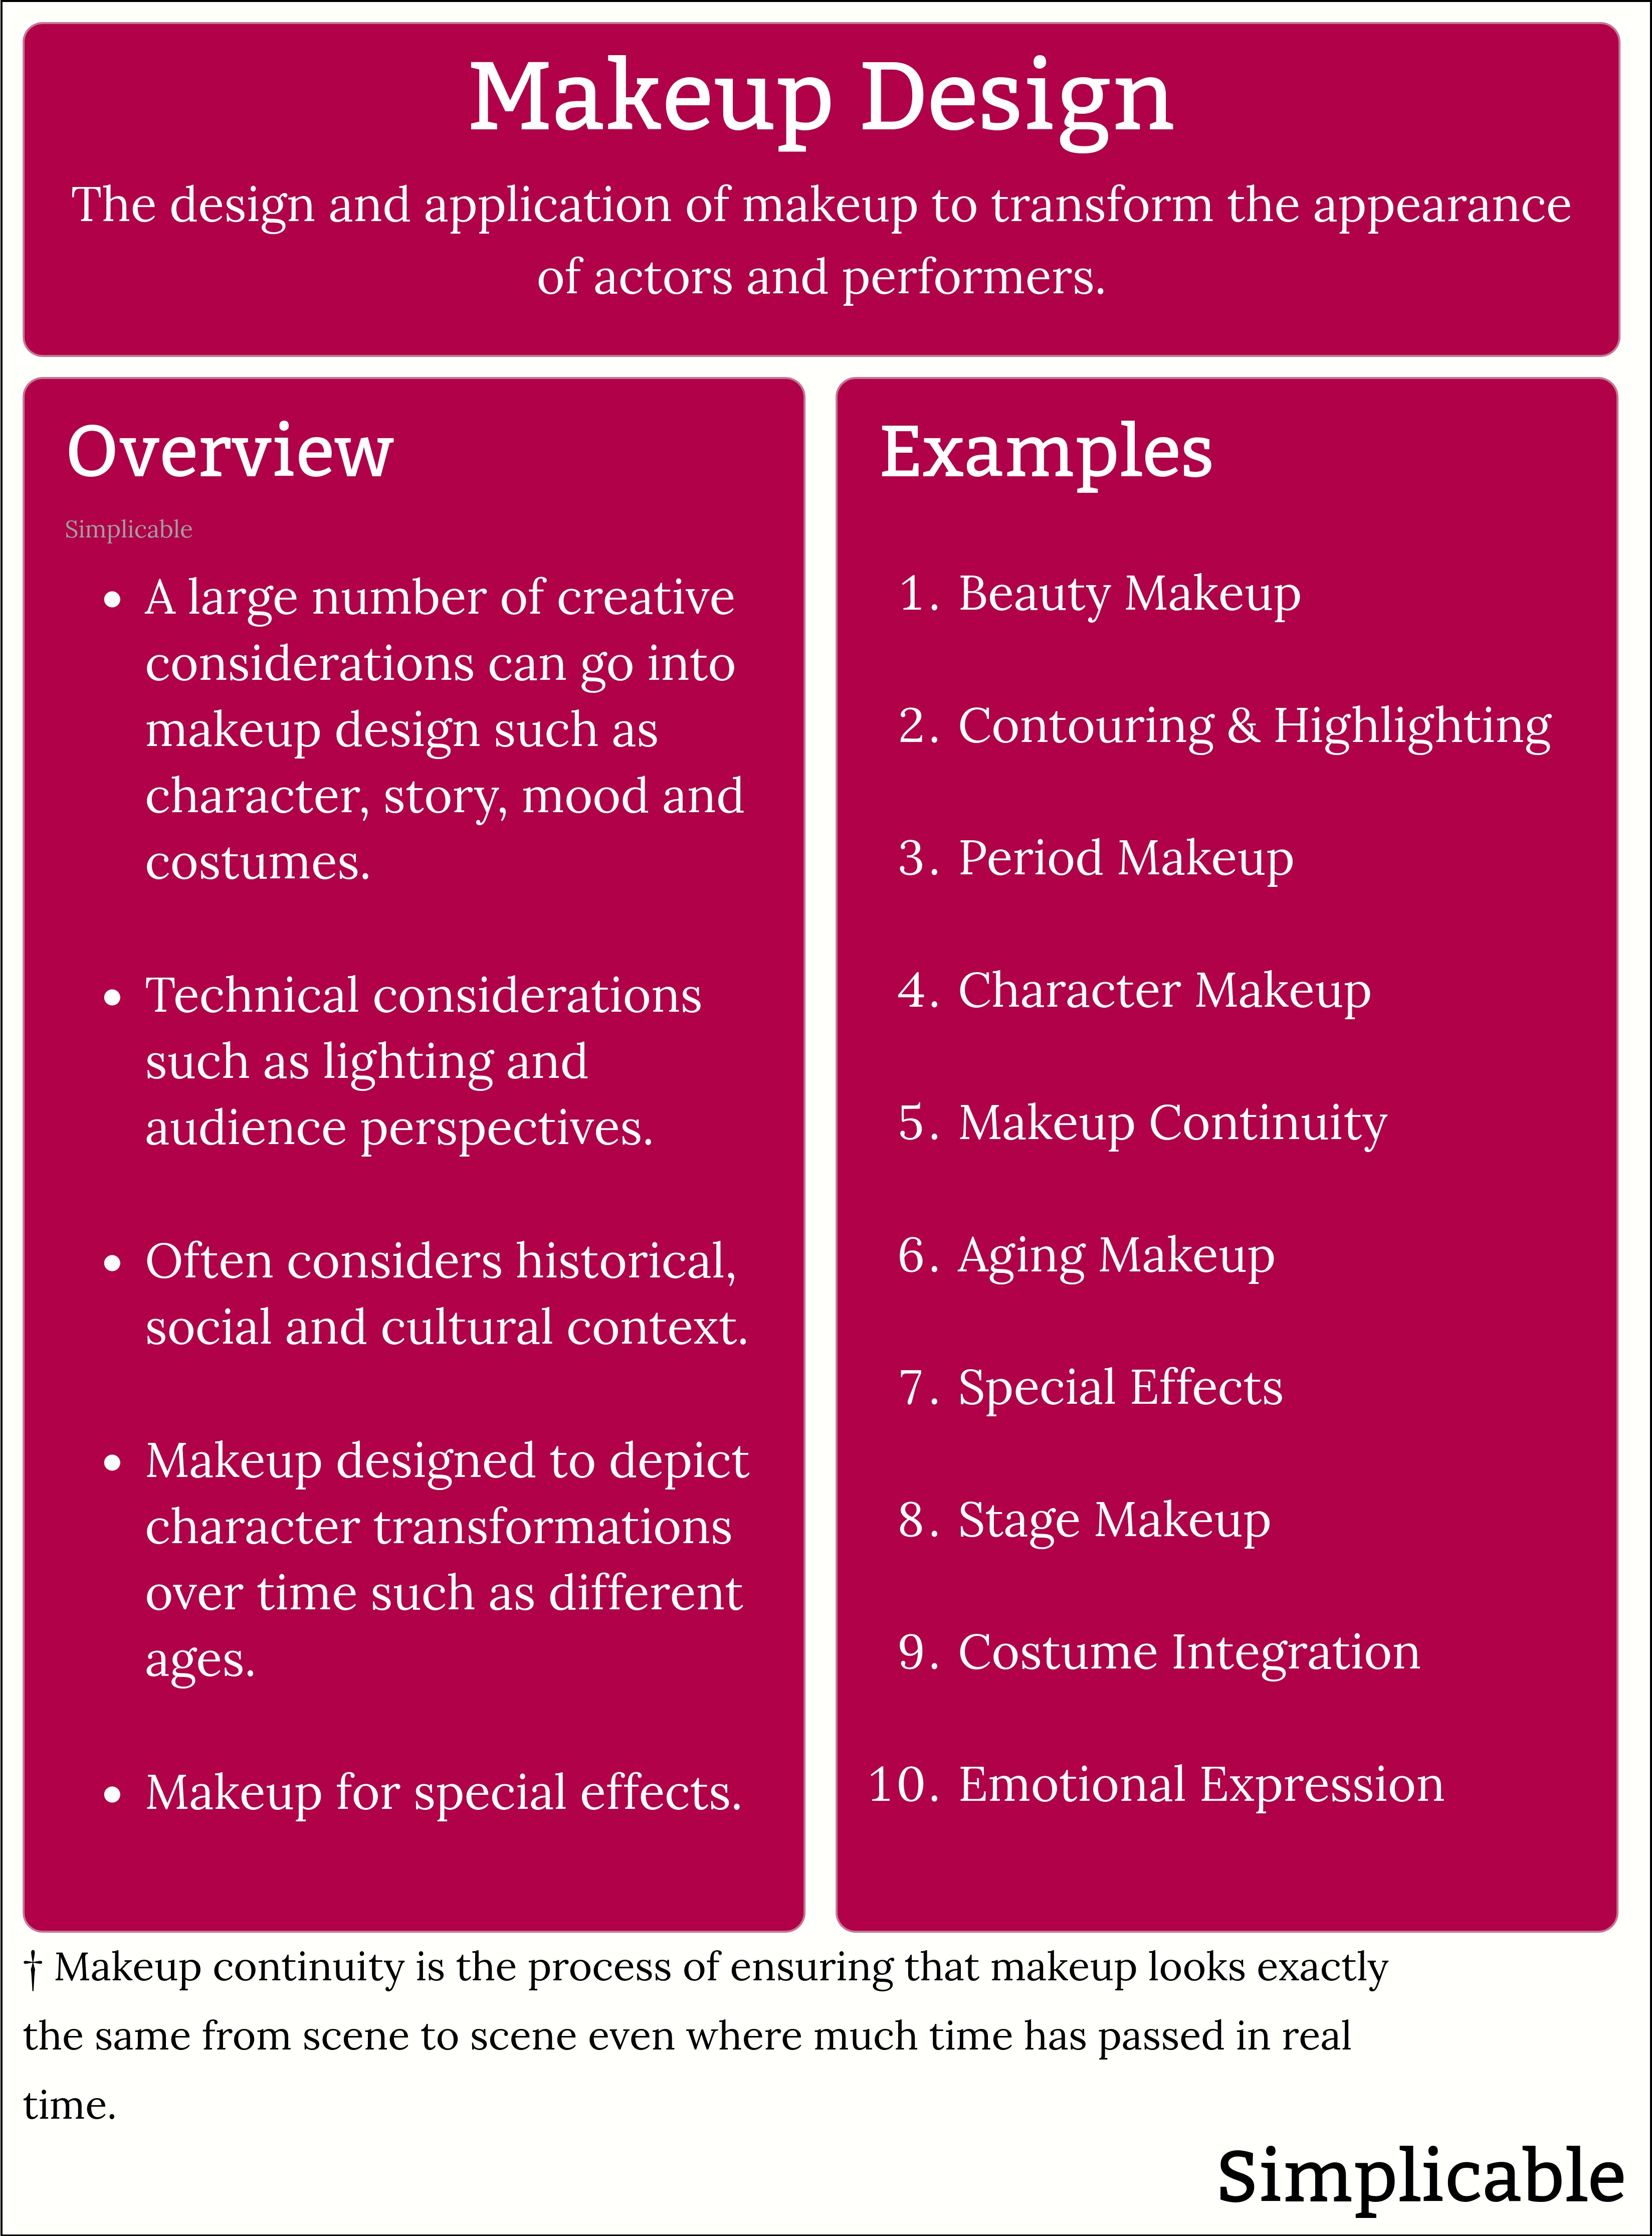 makeup design overview and examples